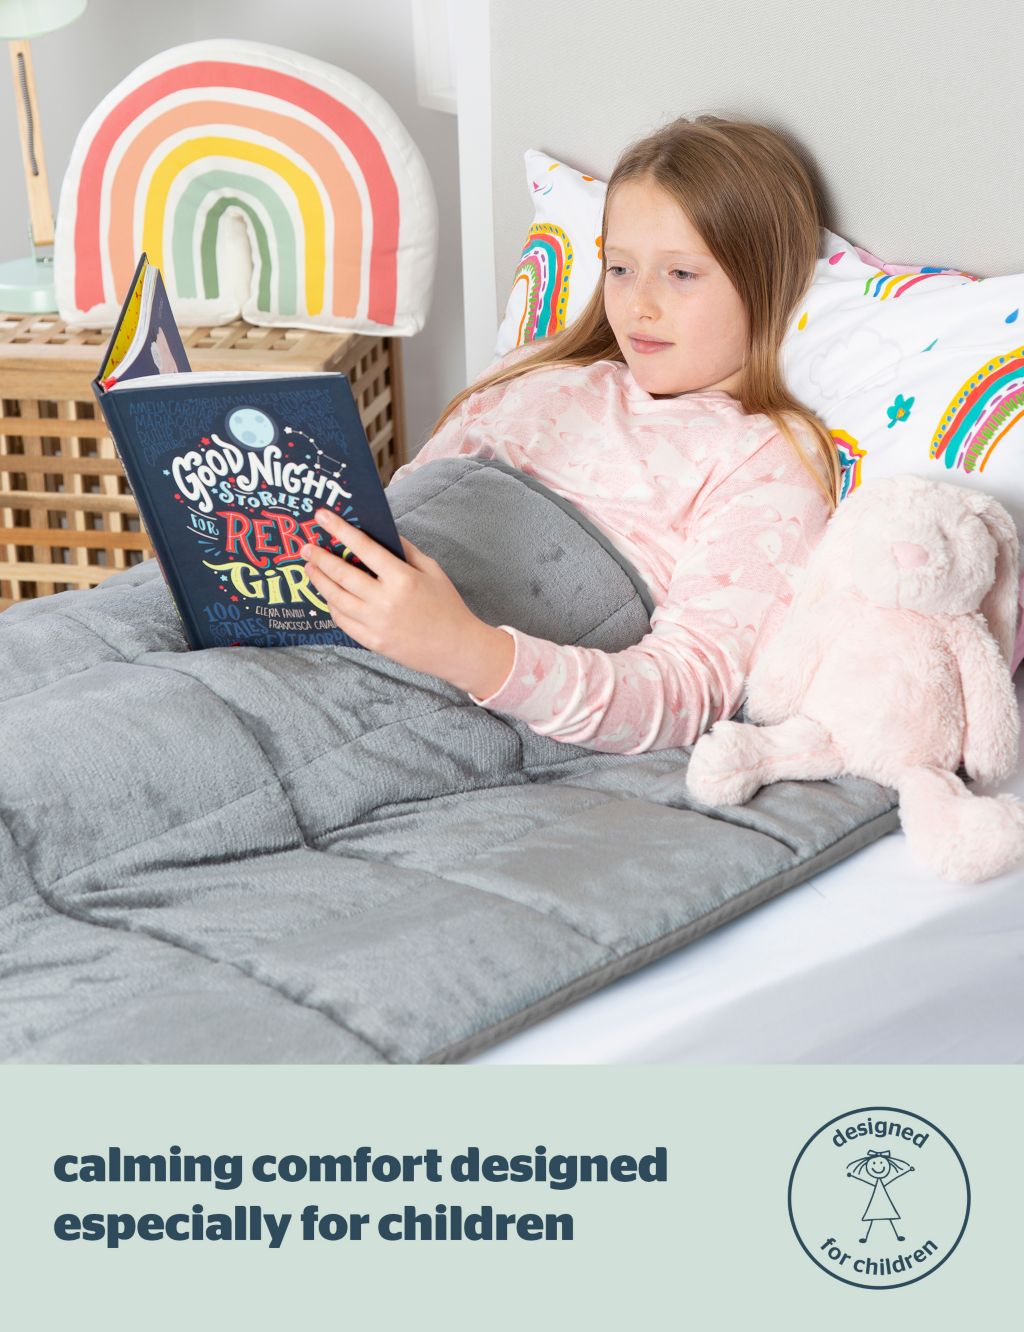 Wellbeing Kids Weighted Blanket 7 of 7